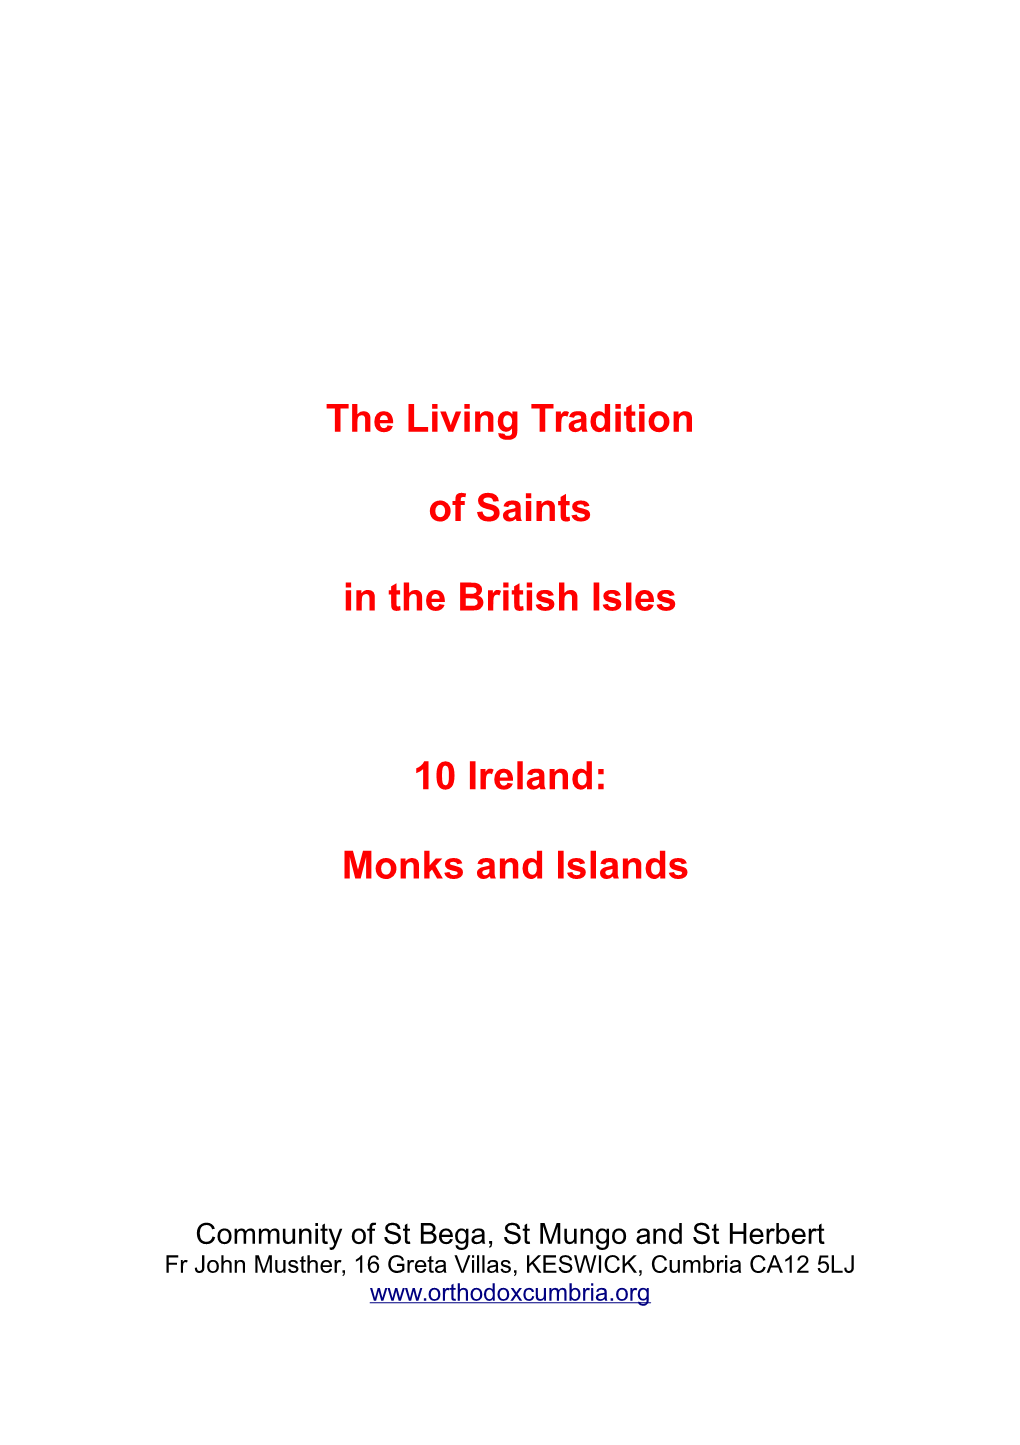 The Living Tradition of Saints in the British Isles 10 Ireland: Monks And